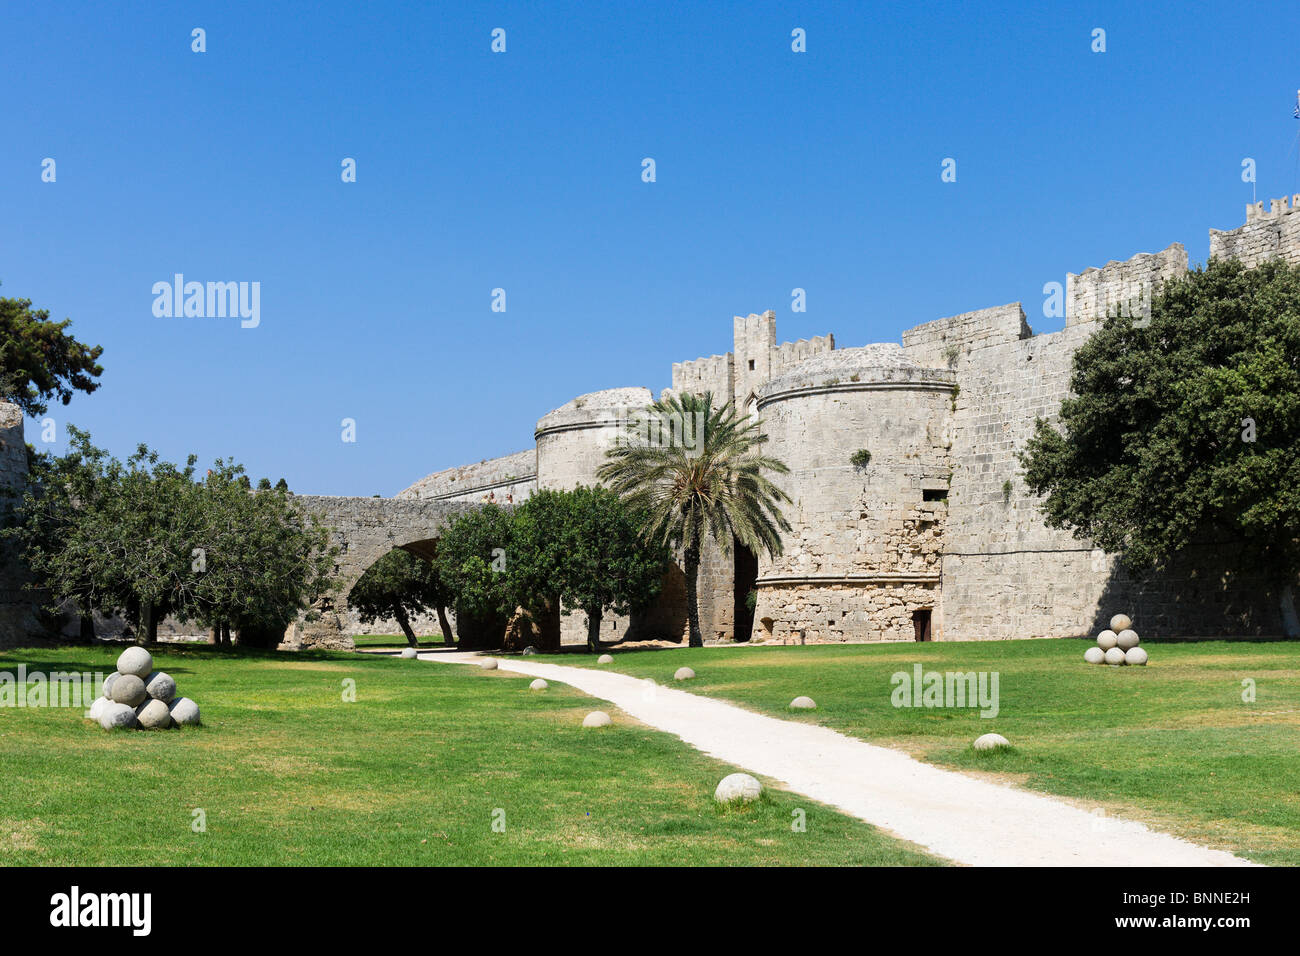 Medieval moat round the walls of the Old Town, Rhodes Town, Rhodes, Greece Stock Photo